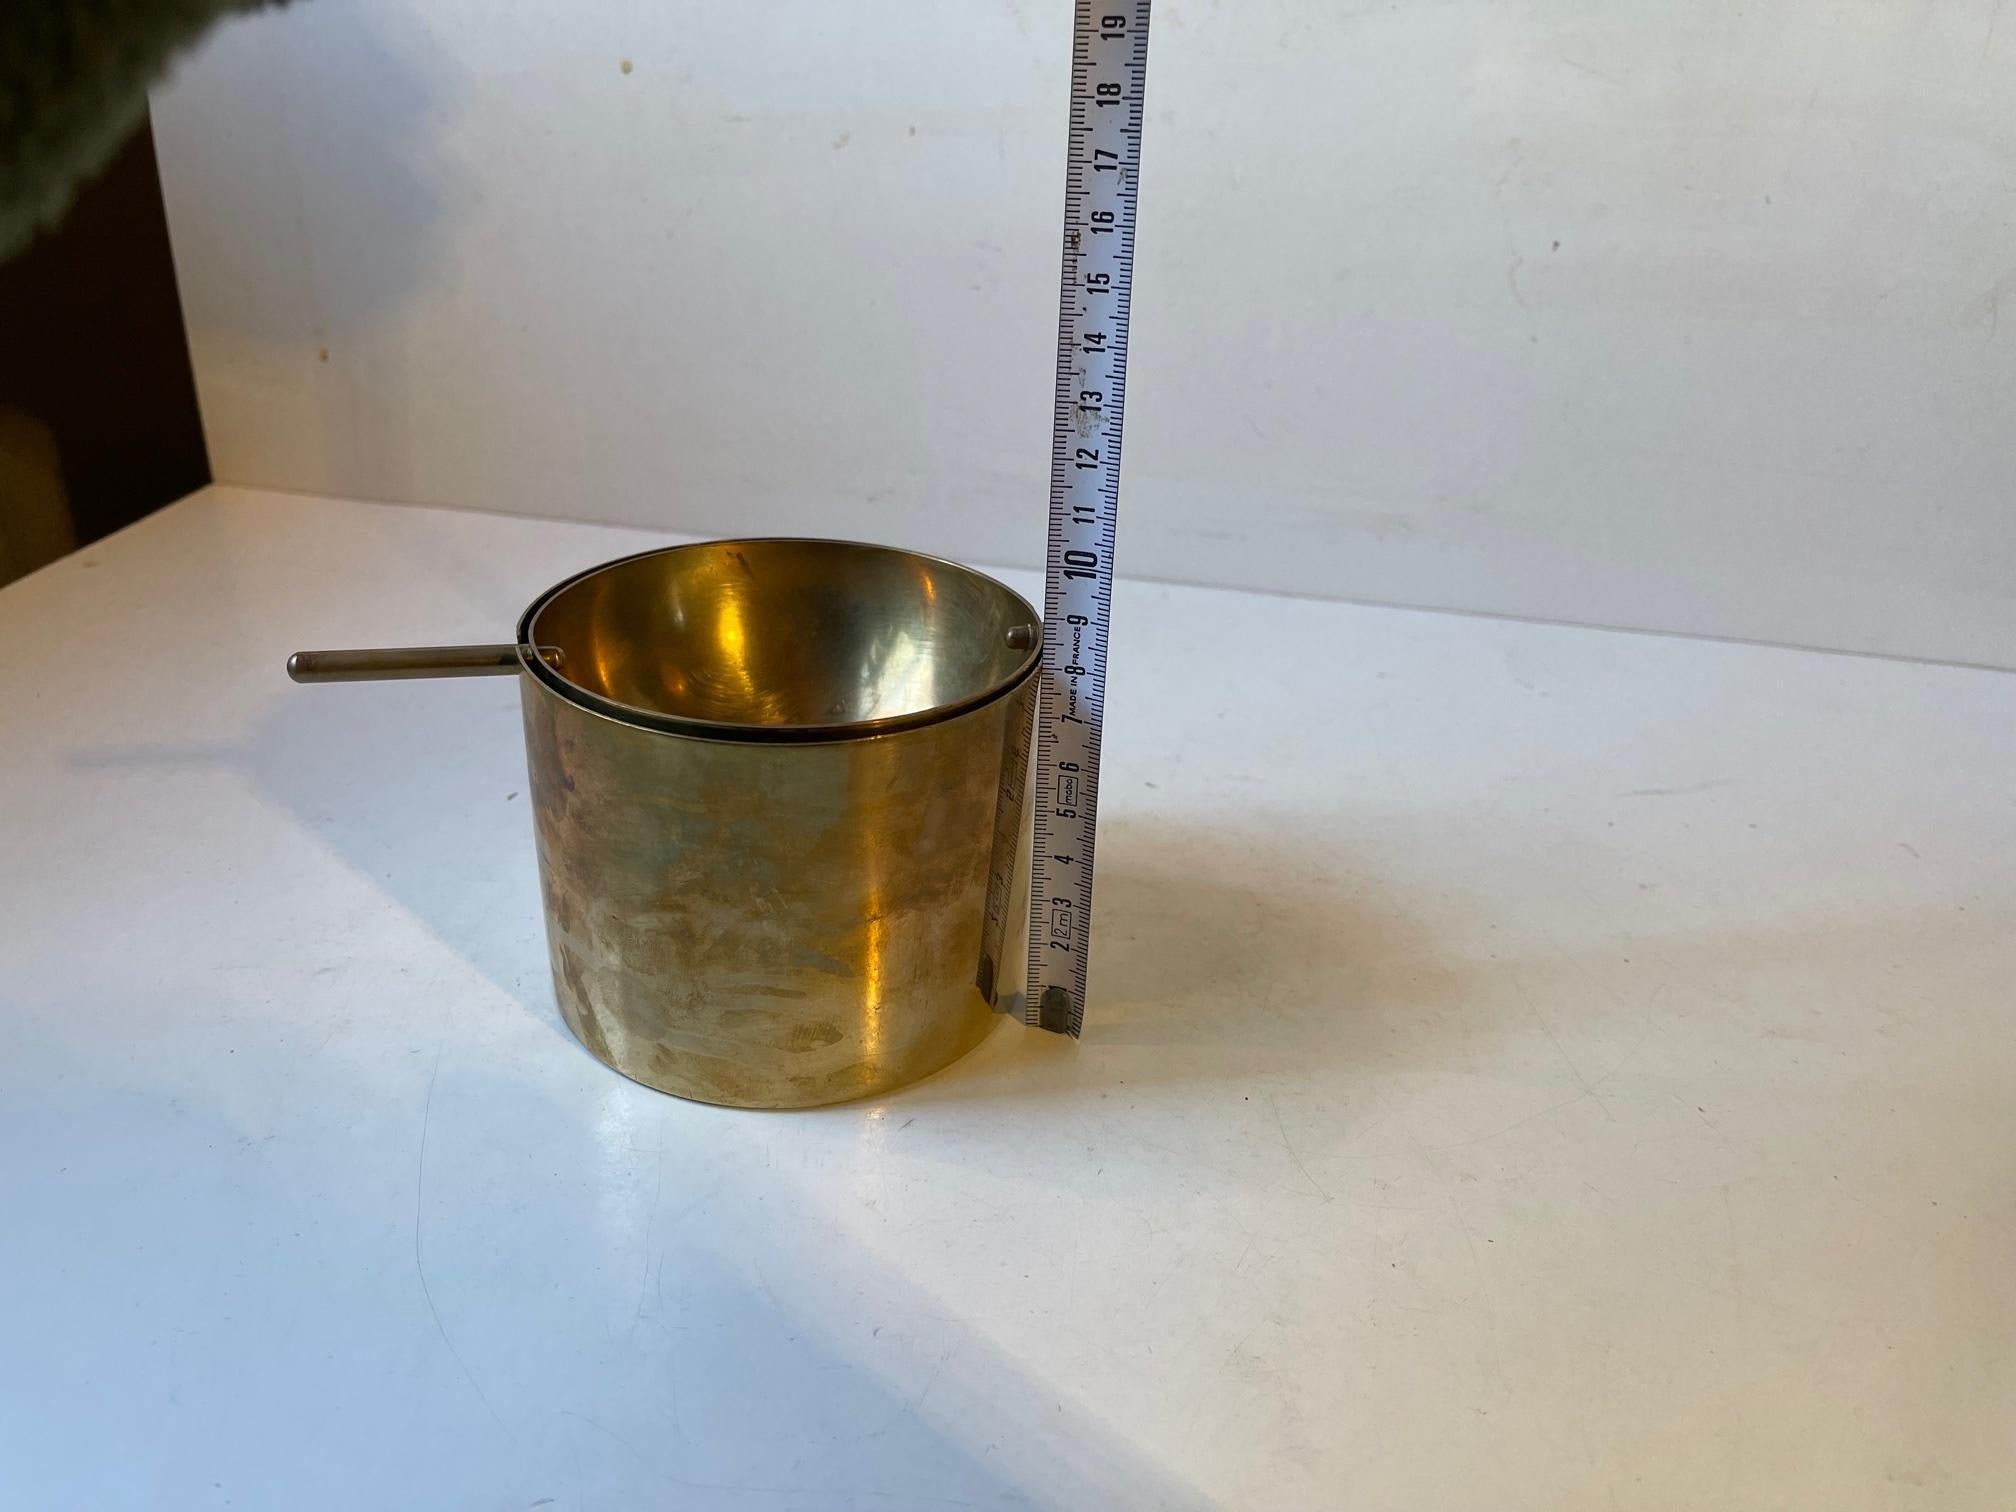 Large Brass Ashtray Cylinda-Line by Arne Jacobsen for Stelton, 1960s For Sale 1